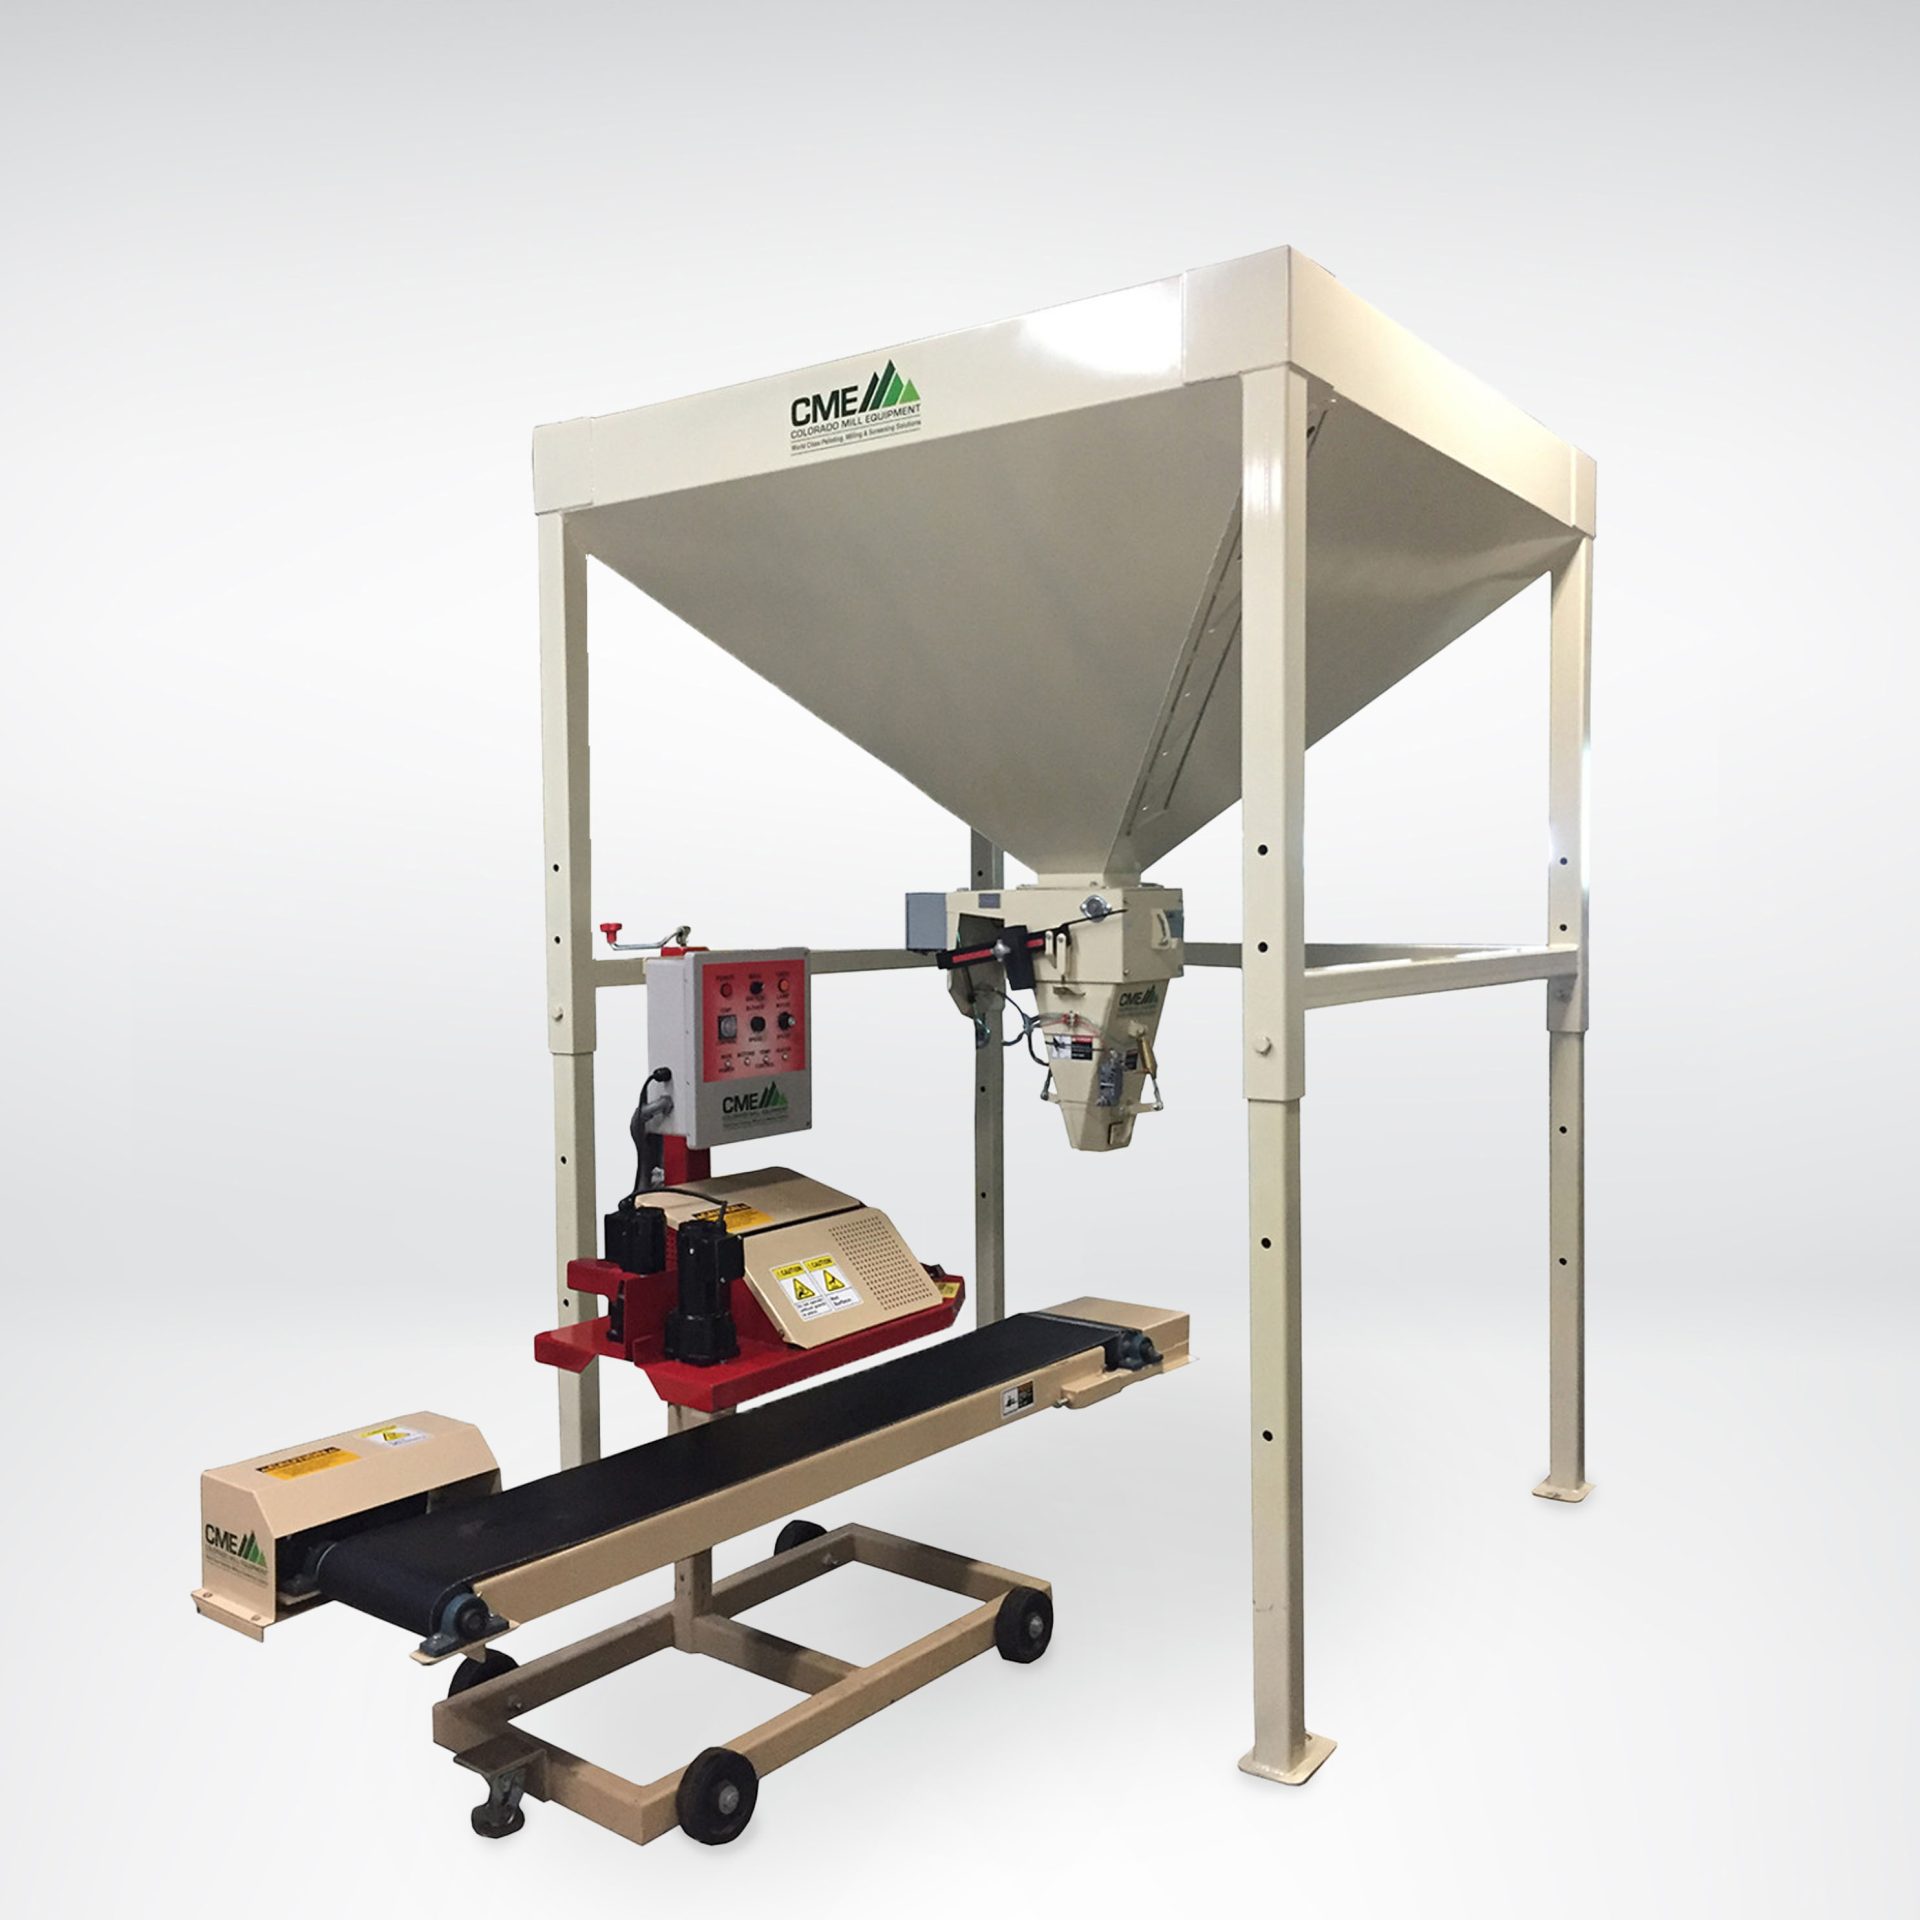 Bagging Equipment & Solutions from CME | Crafted in the USA. Superbin Bag Filler Station and MILL-SLR Bag Sealer